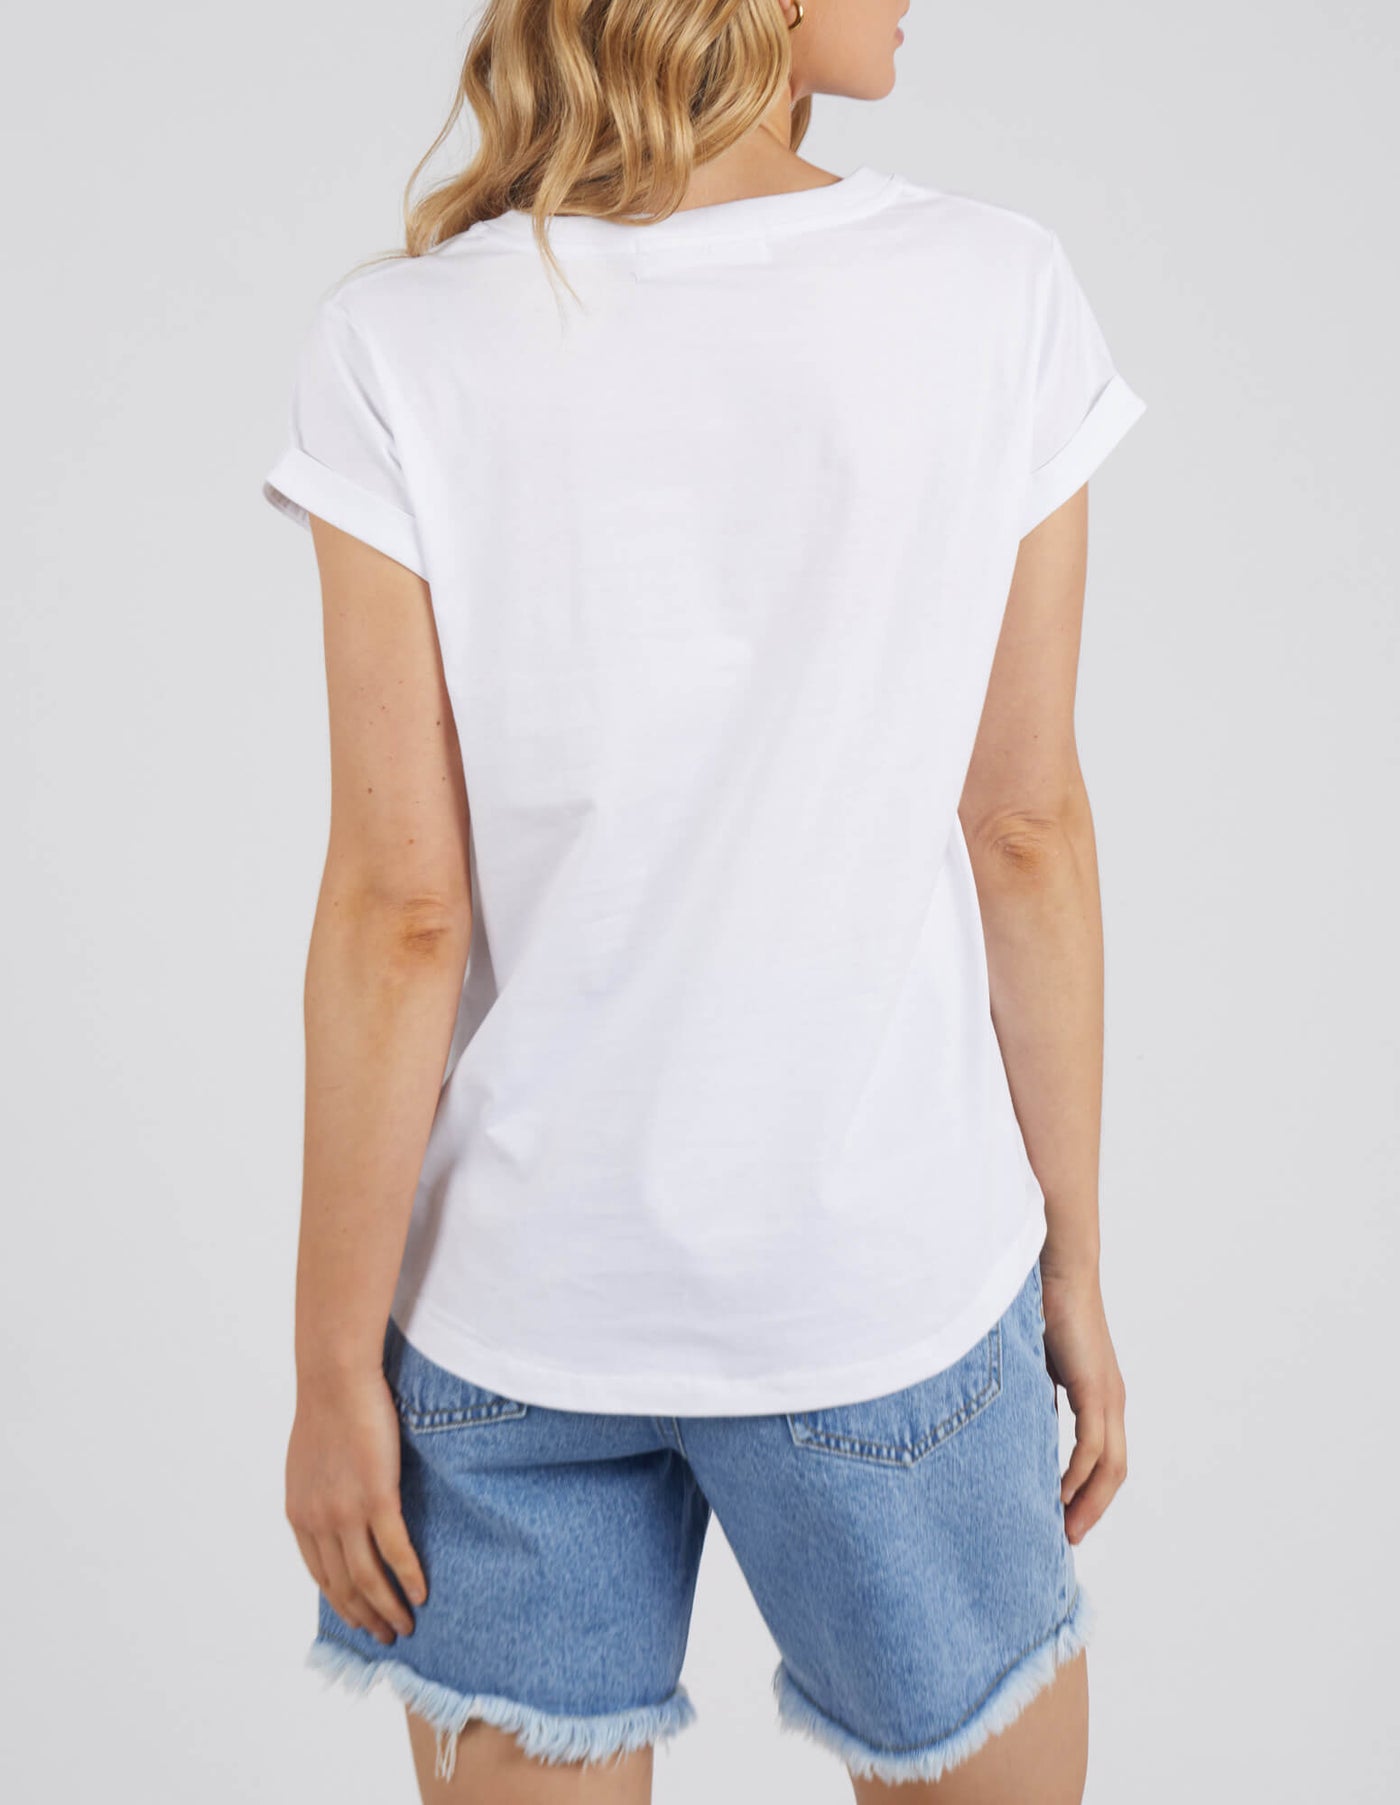 Manly Vee Tee - White